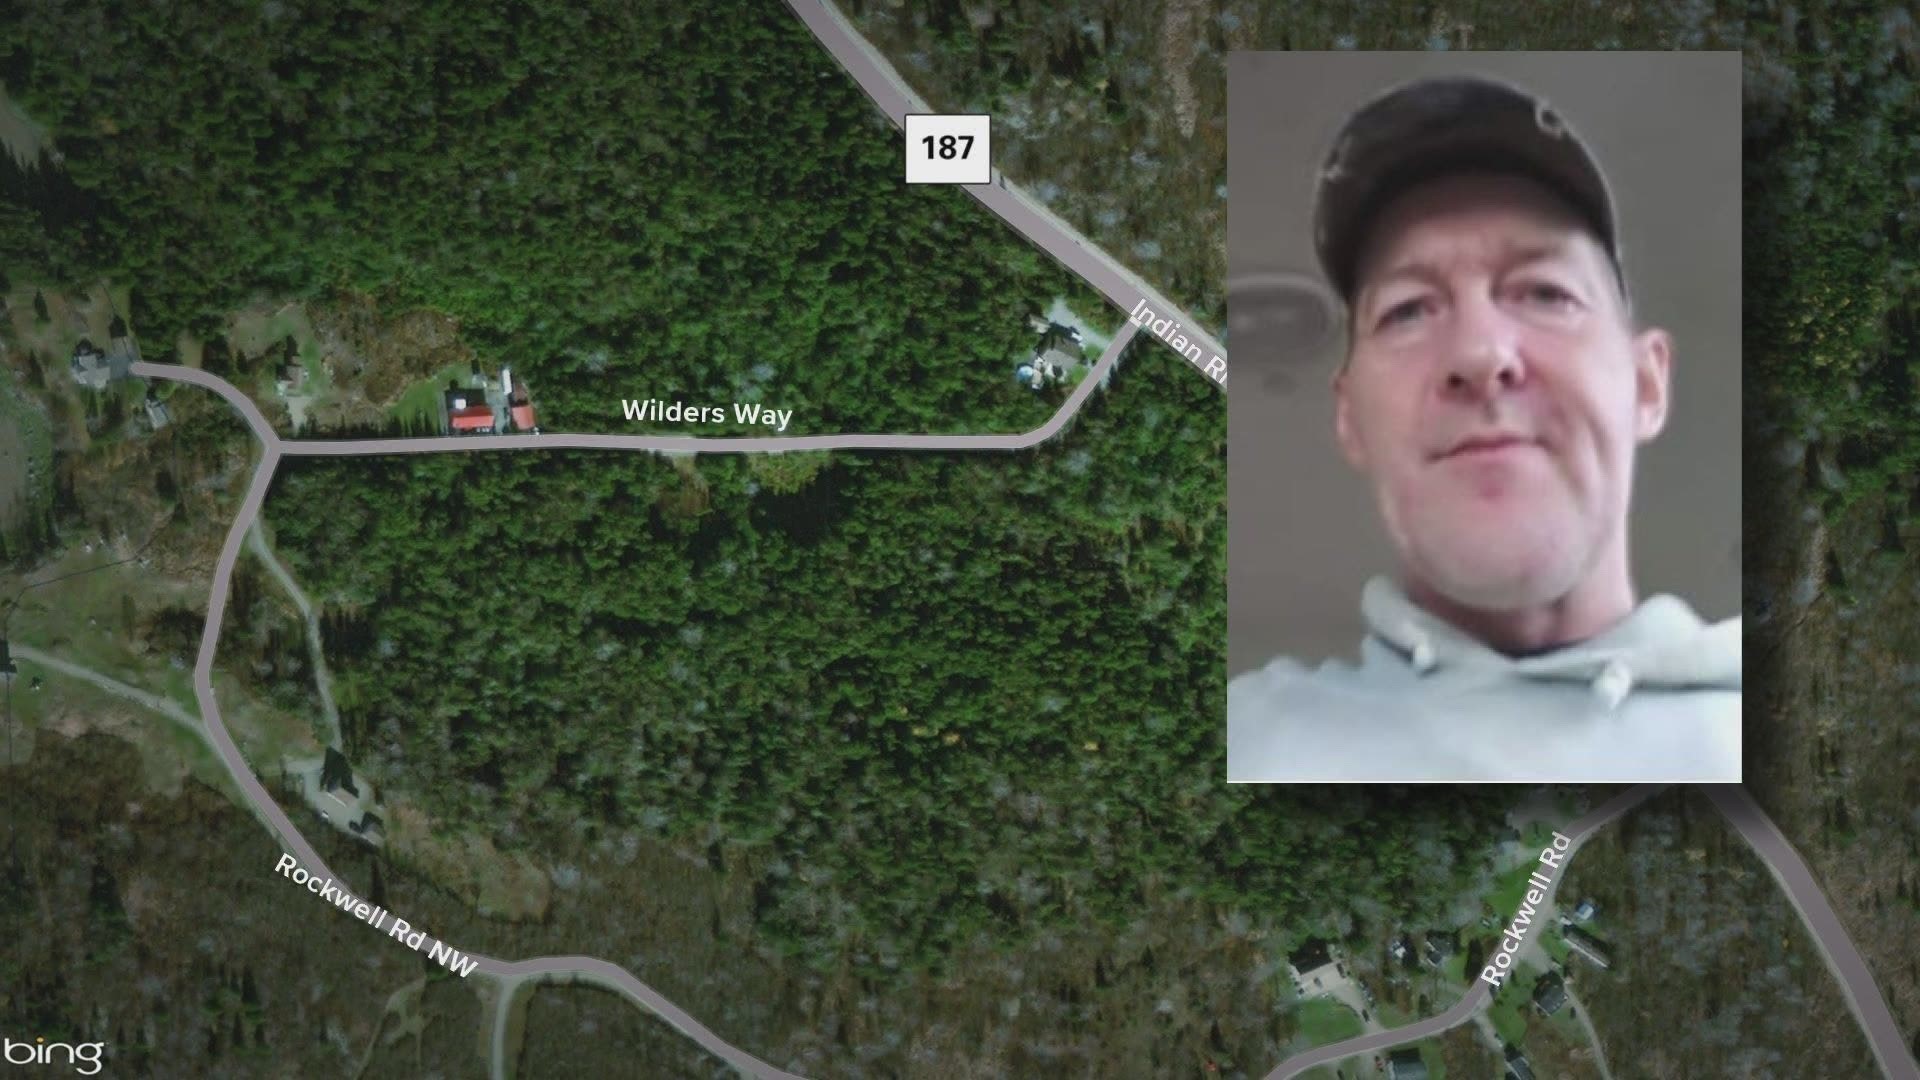 Human remains found off Route 187 in Jonesport